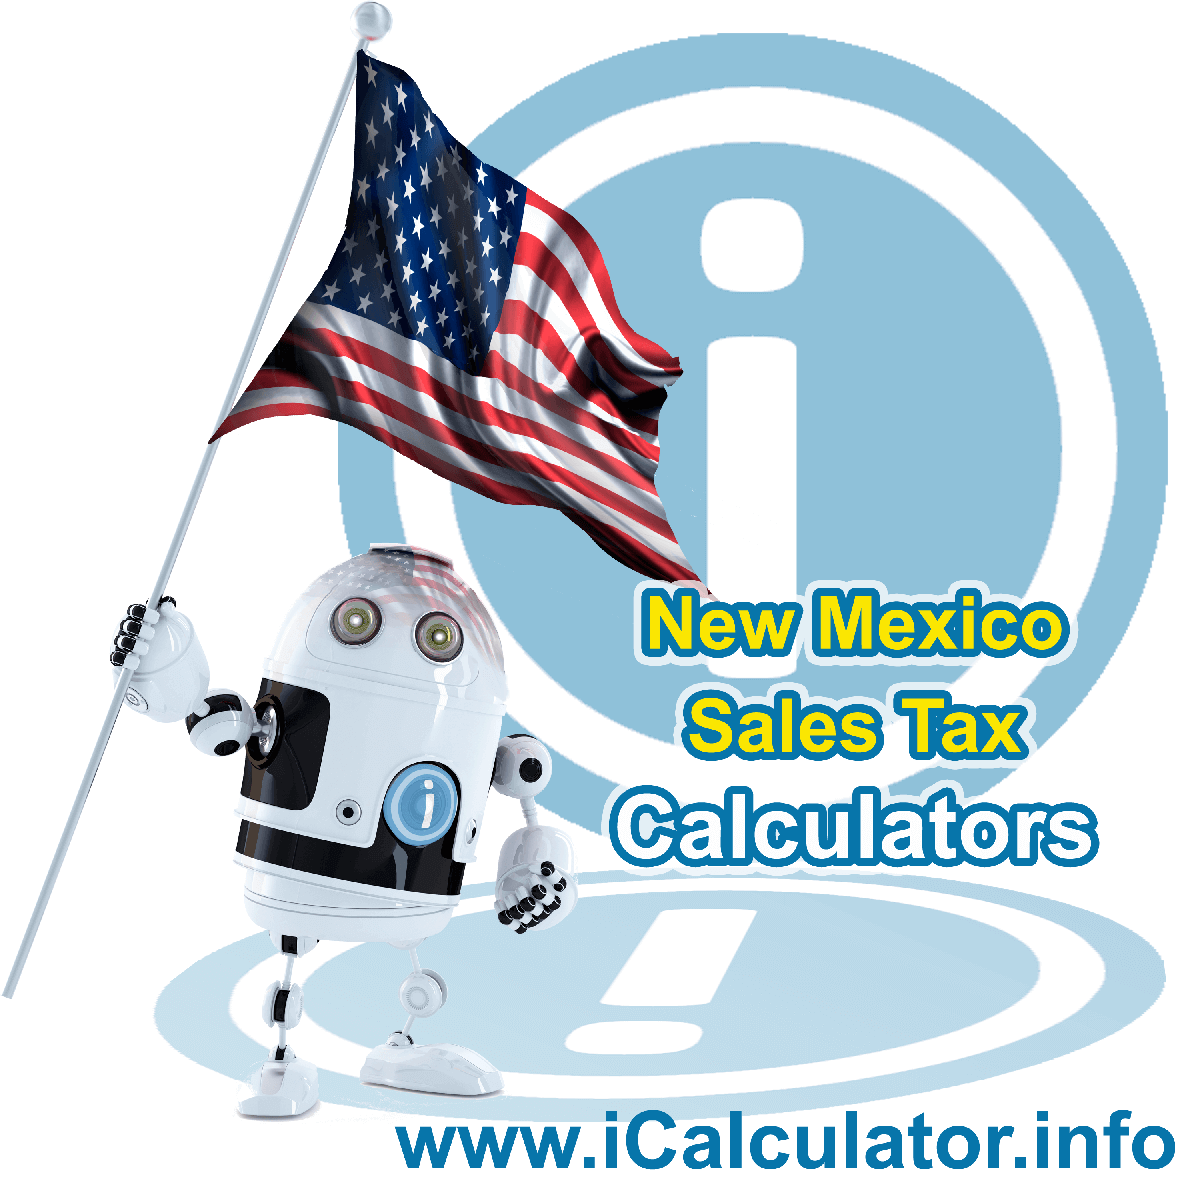 US Sales Tax Calculator: This image illustrates a calculator robot calculating sales tax in the United States manually using the United States Sales Tax Formula. You can use this information to calculate Sales Tax manually or use the United States Sales Tax Calculator to calculate sales tax online.